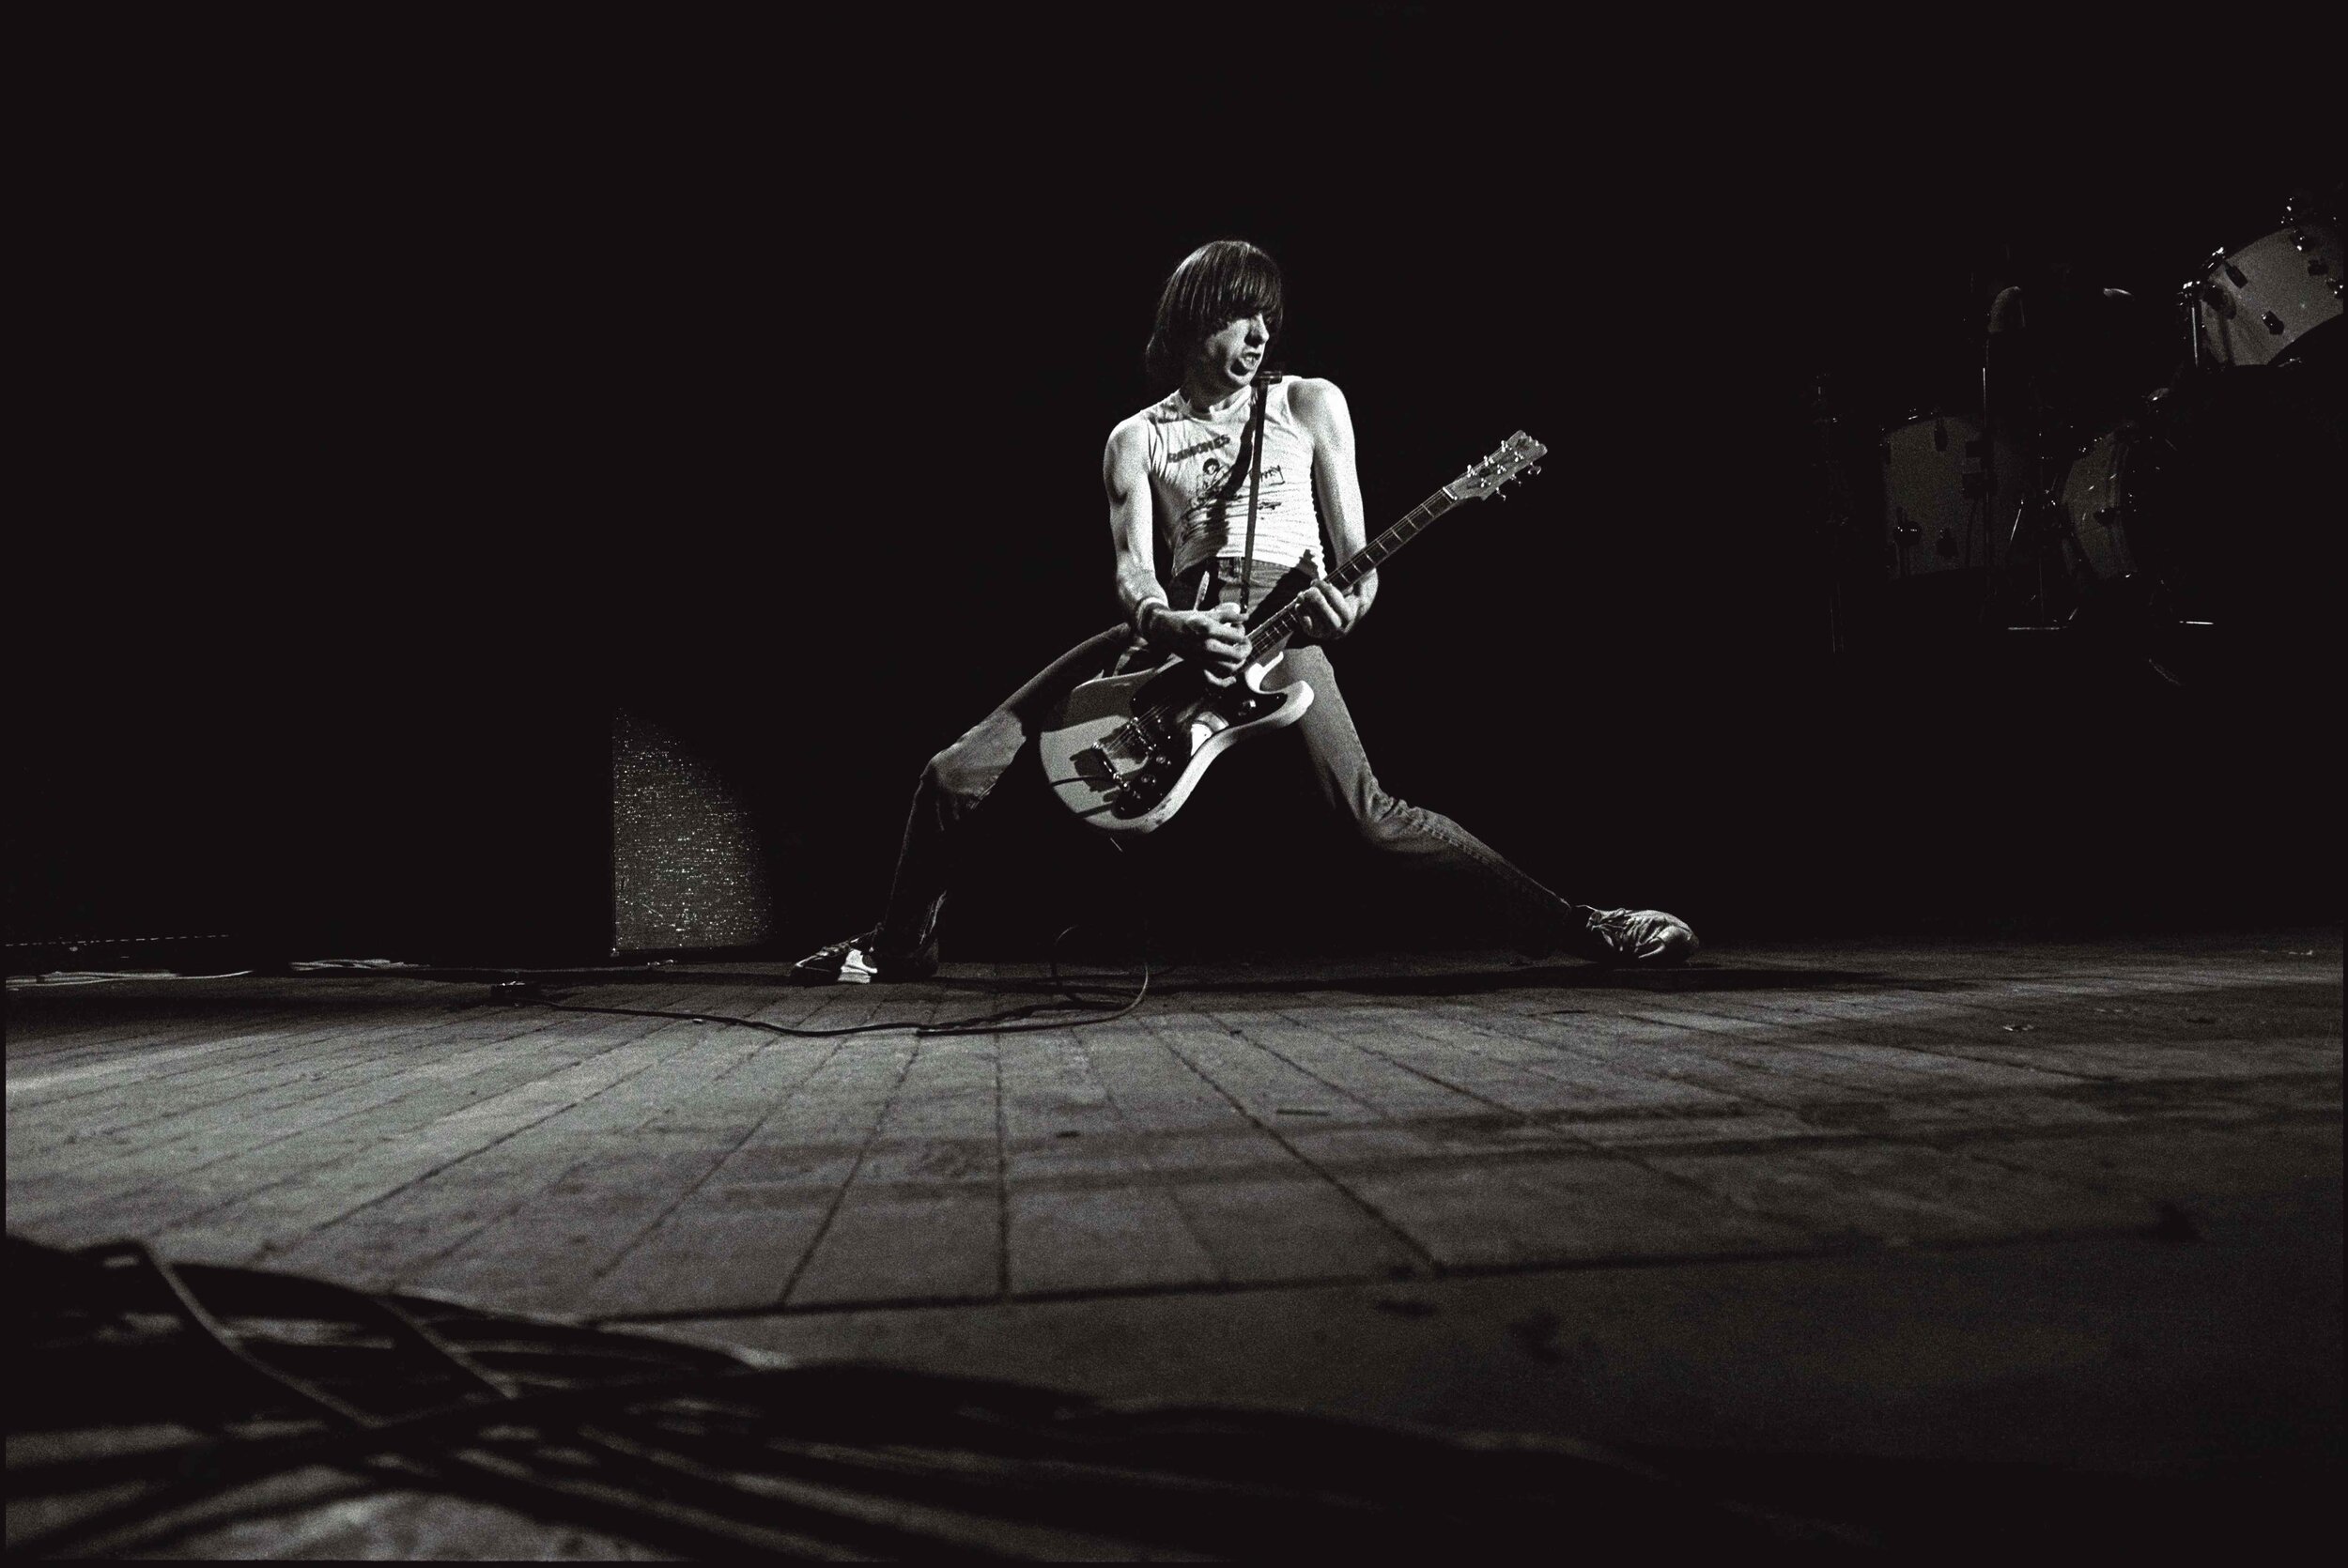 Johnny Ramone performing at Hammersmith Odeon, London, England, 1979